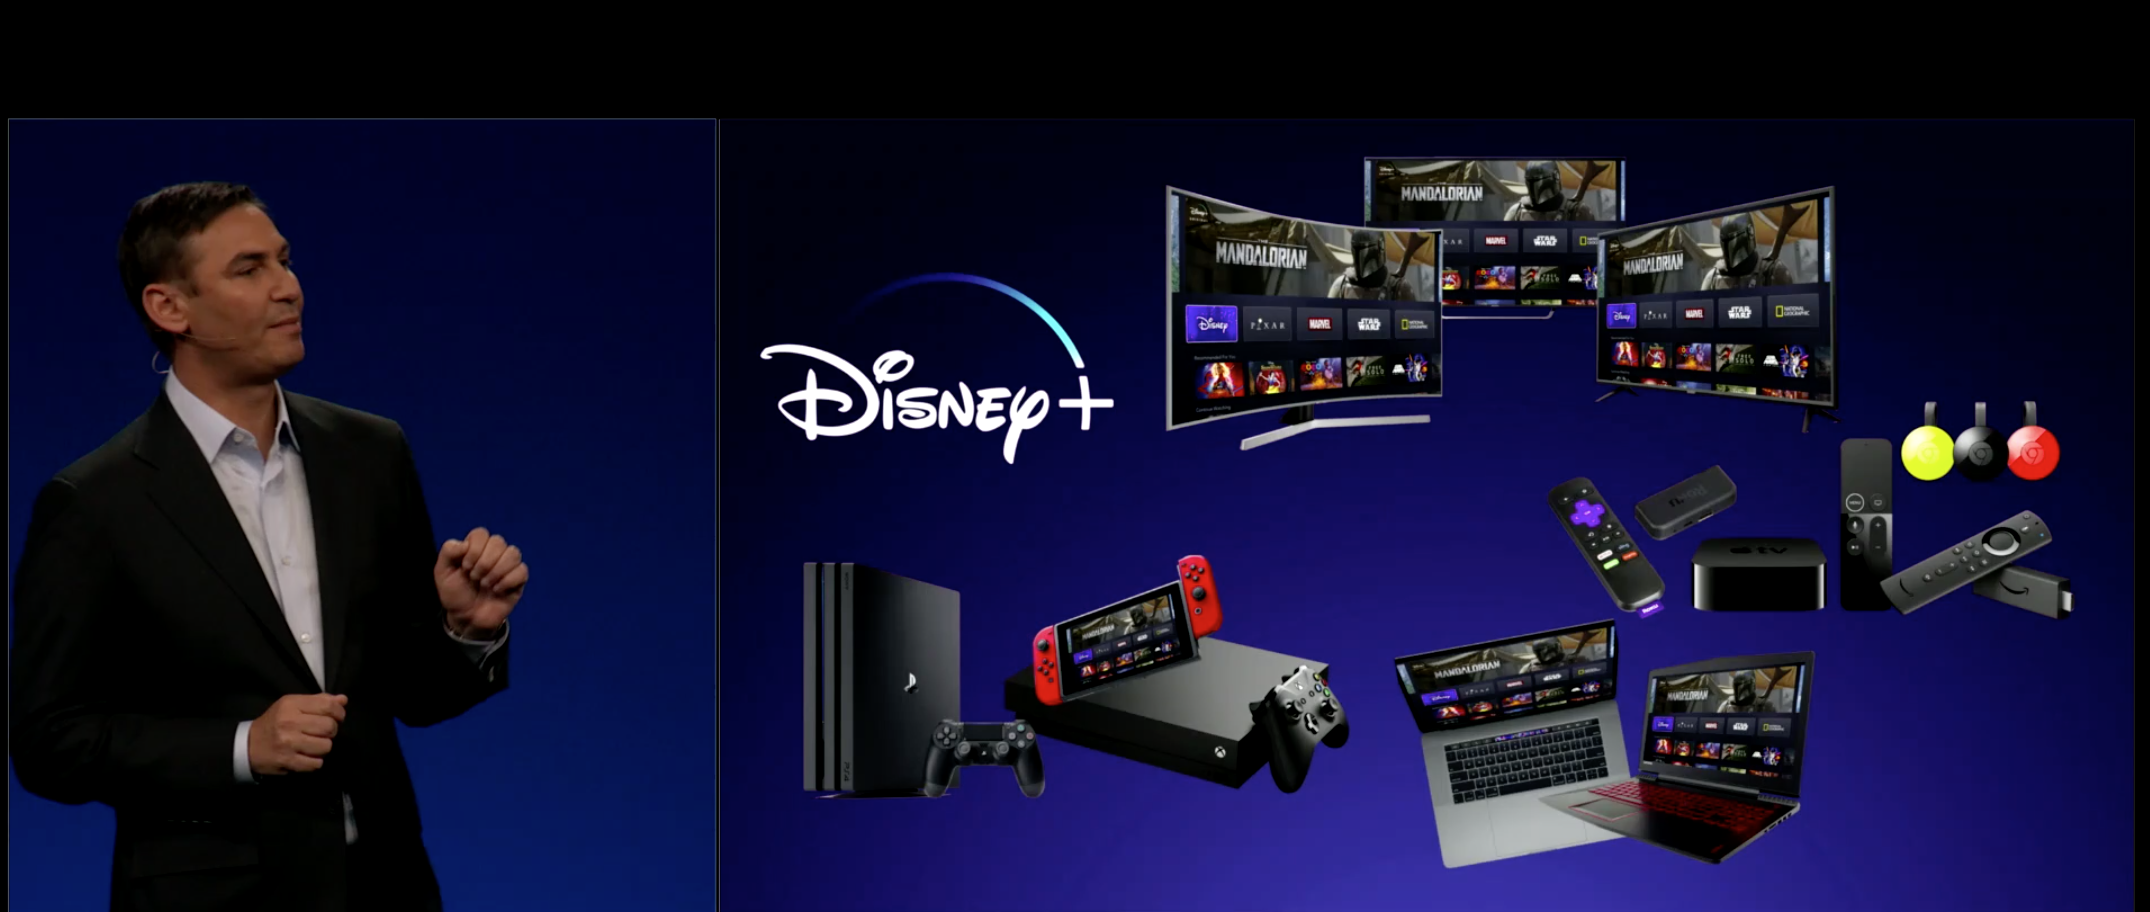 Disney+ will come to mobile and game consoles, including